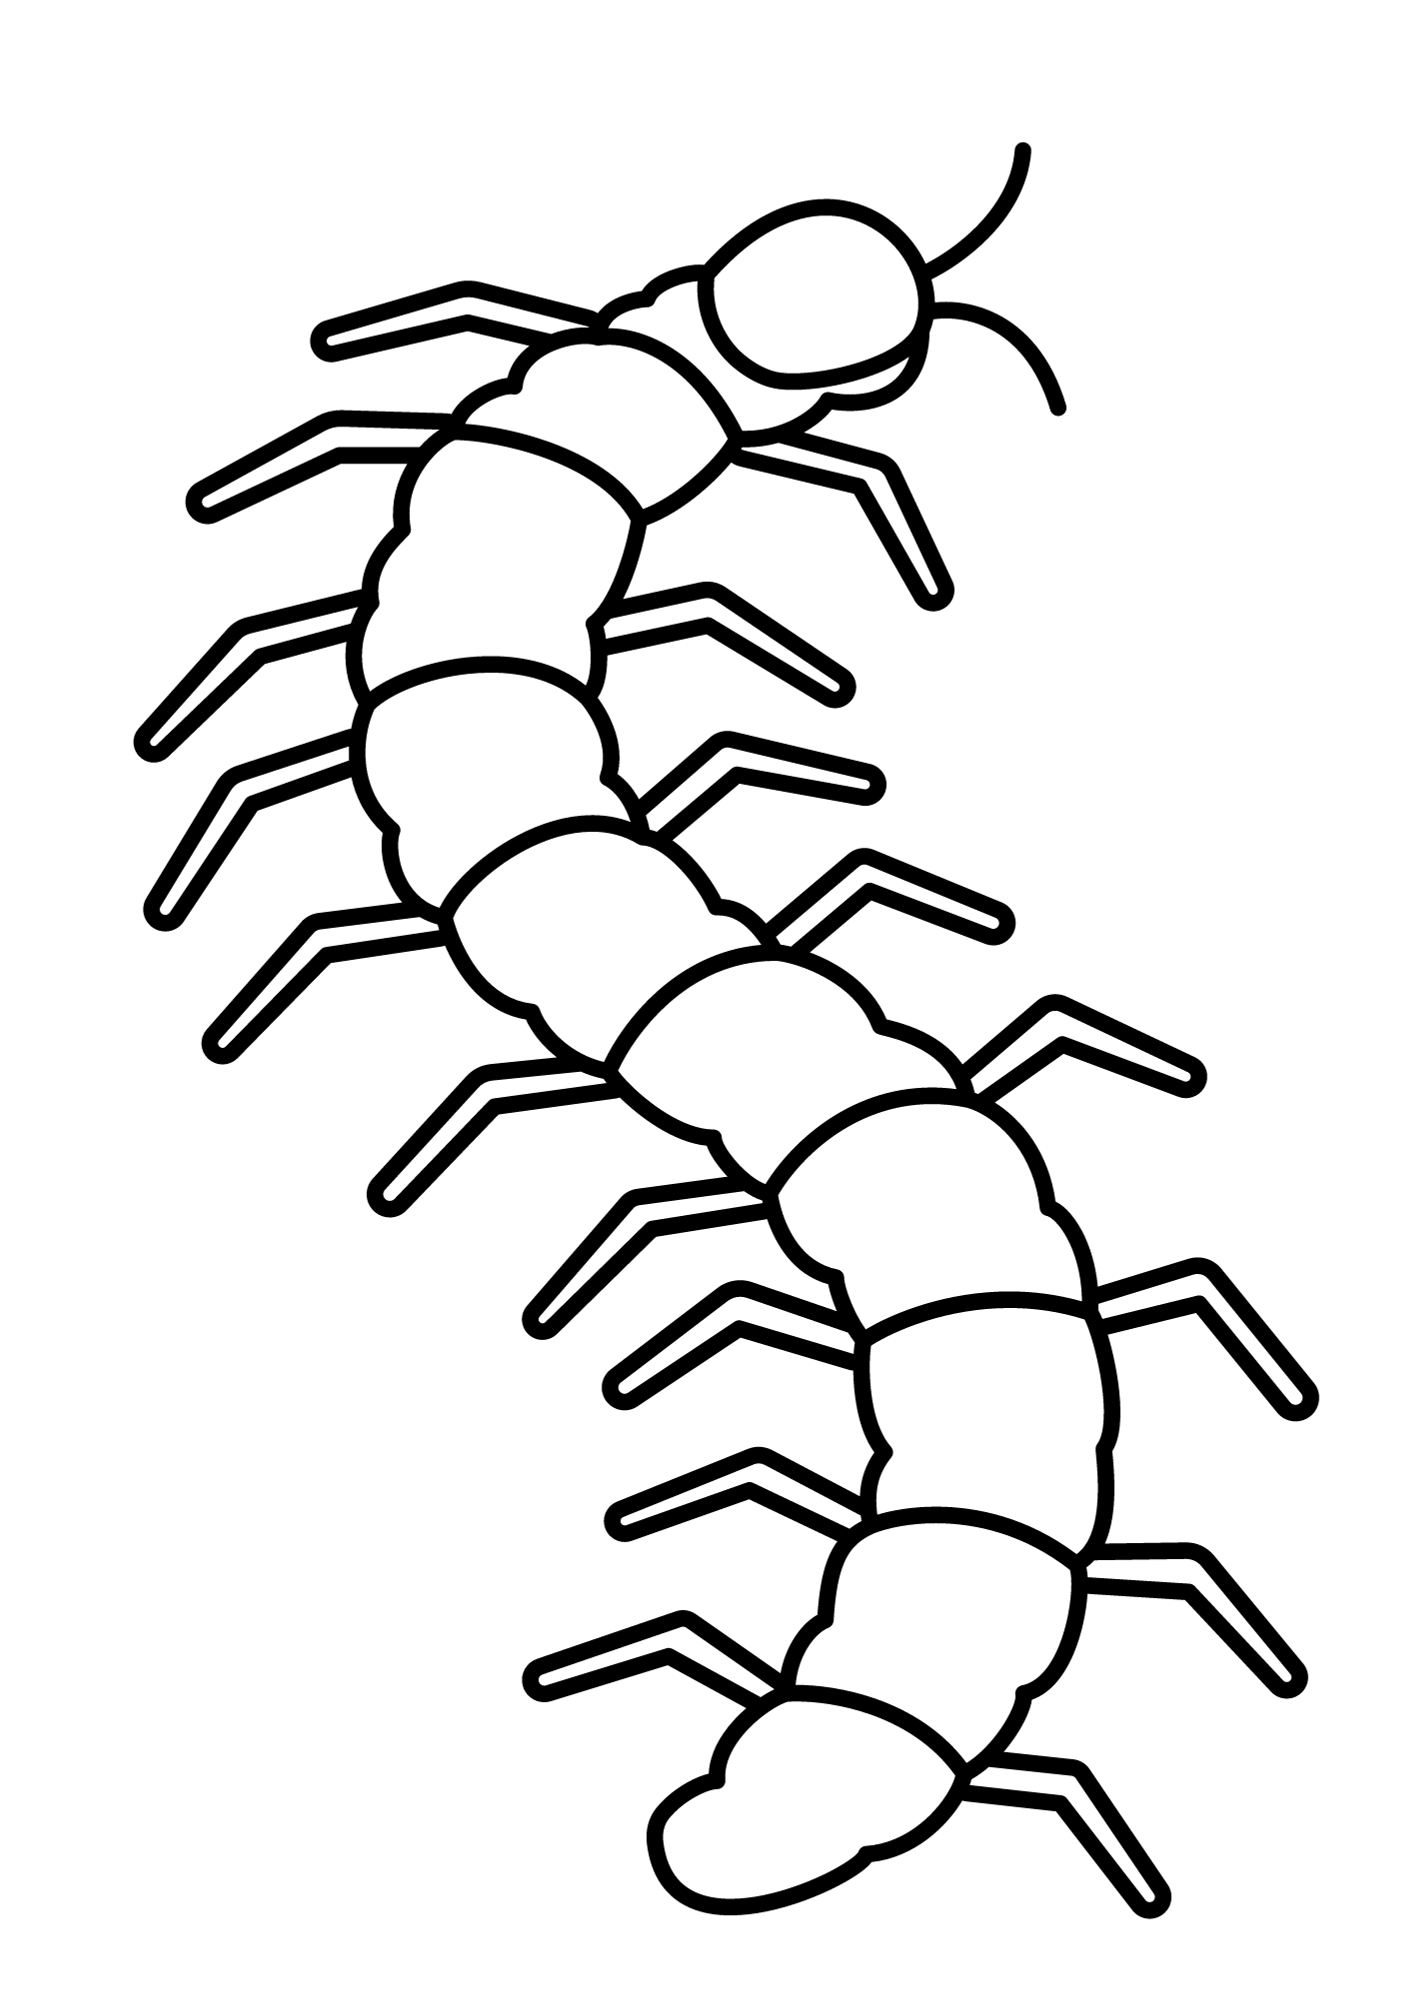 Centipede Outline Coloring Page